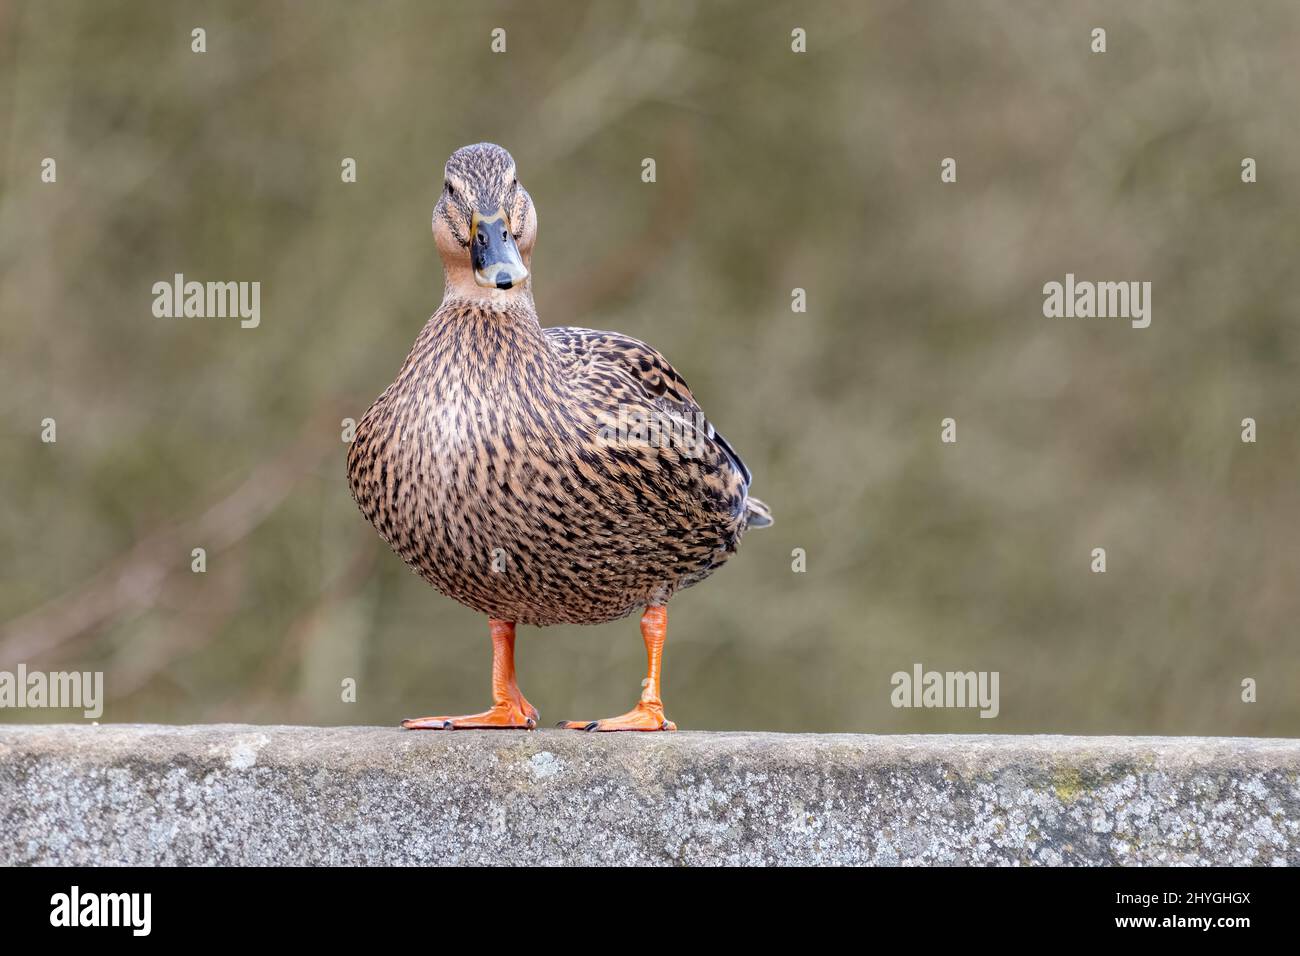 A close up portrait of a female mallard taken at eye level as she is standing on a stone ledge Stock Photo